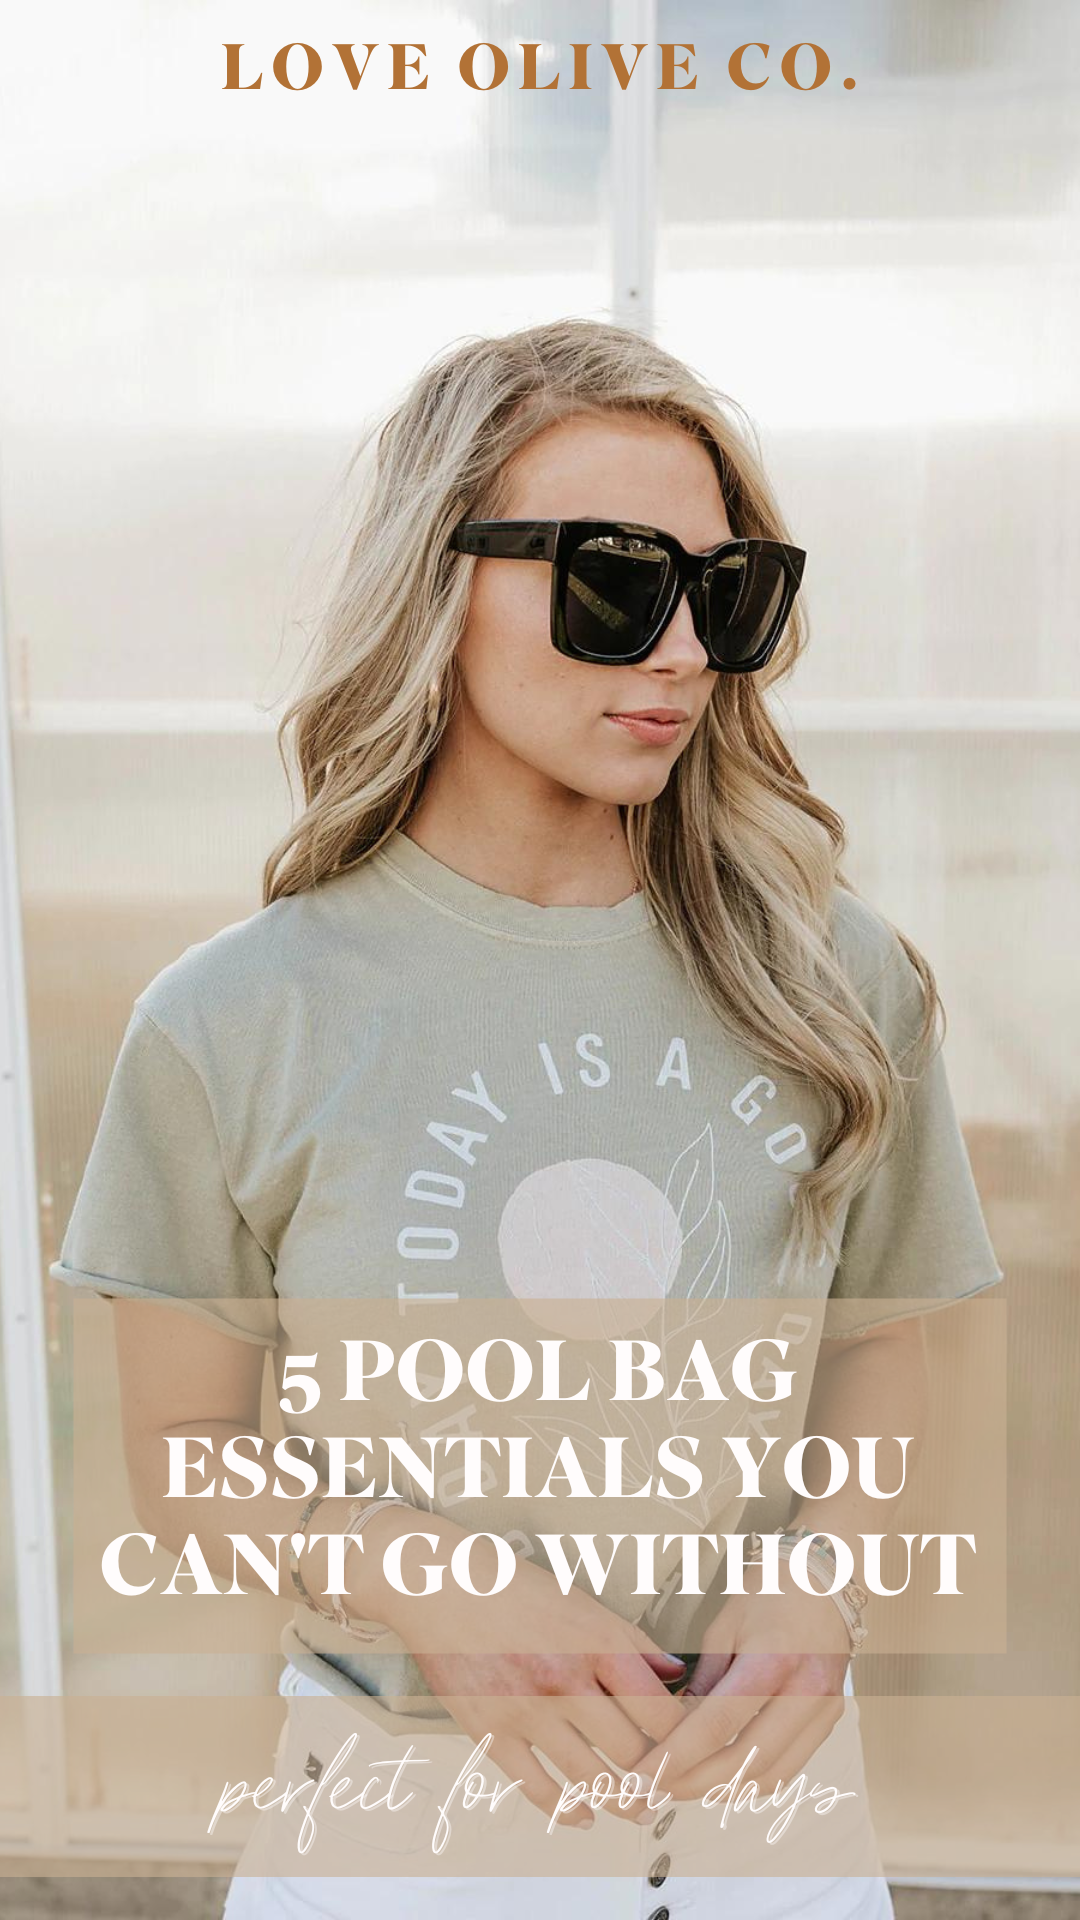 5 pool bag essentials you can't go without. www.www.loveoliveshop.com